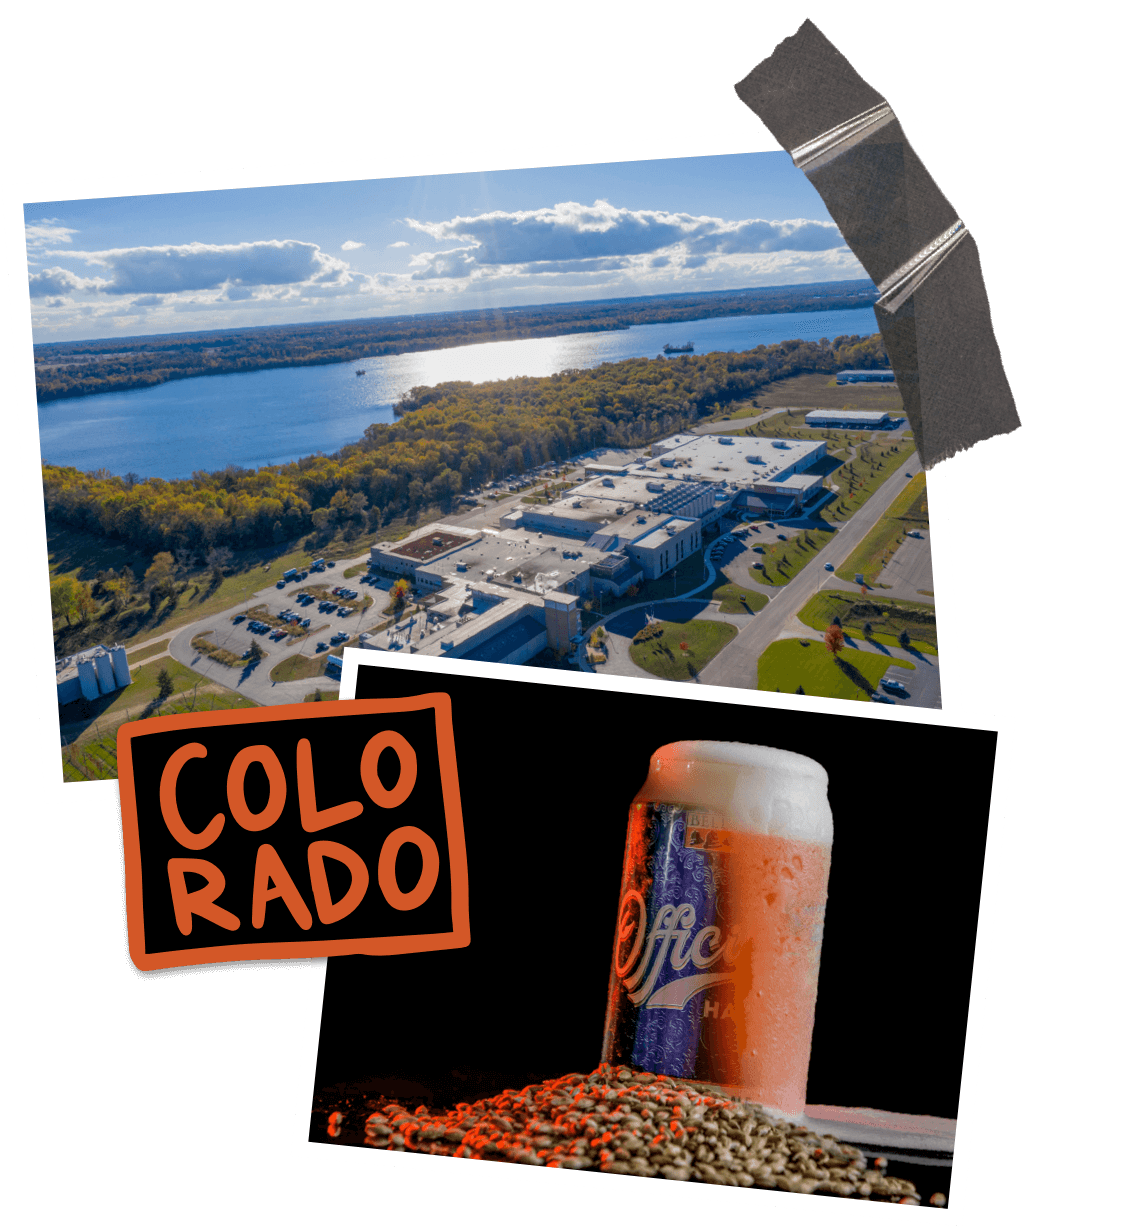 Sky image of the brewery, image of colorado, bottle of official